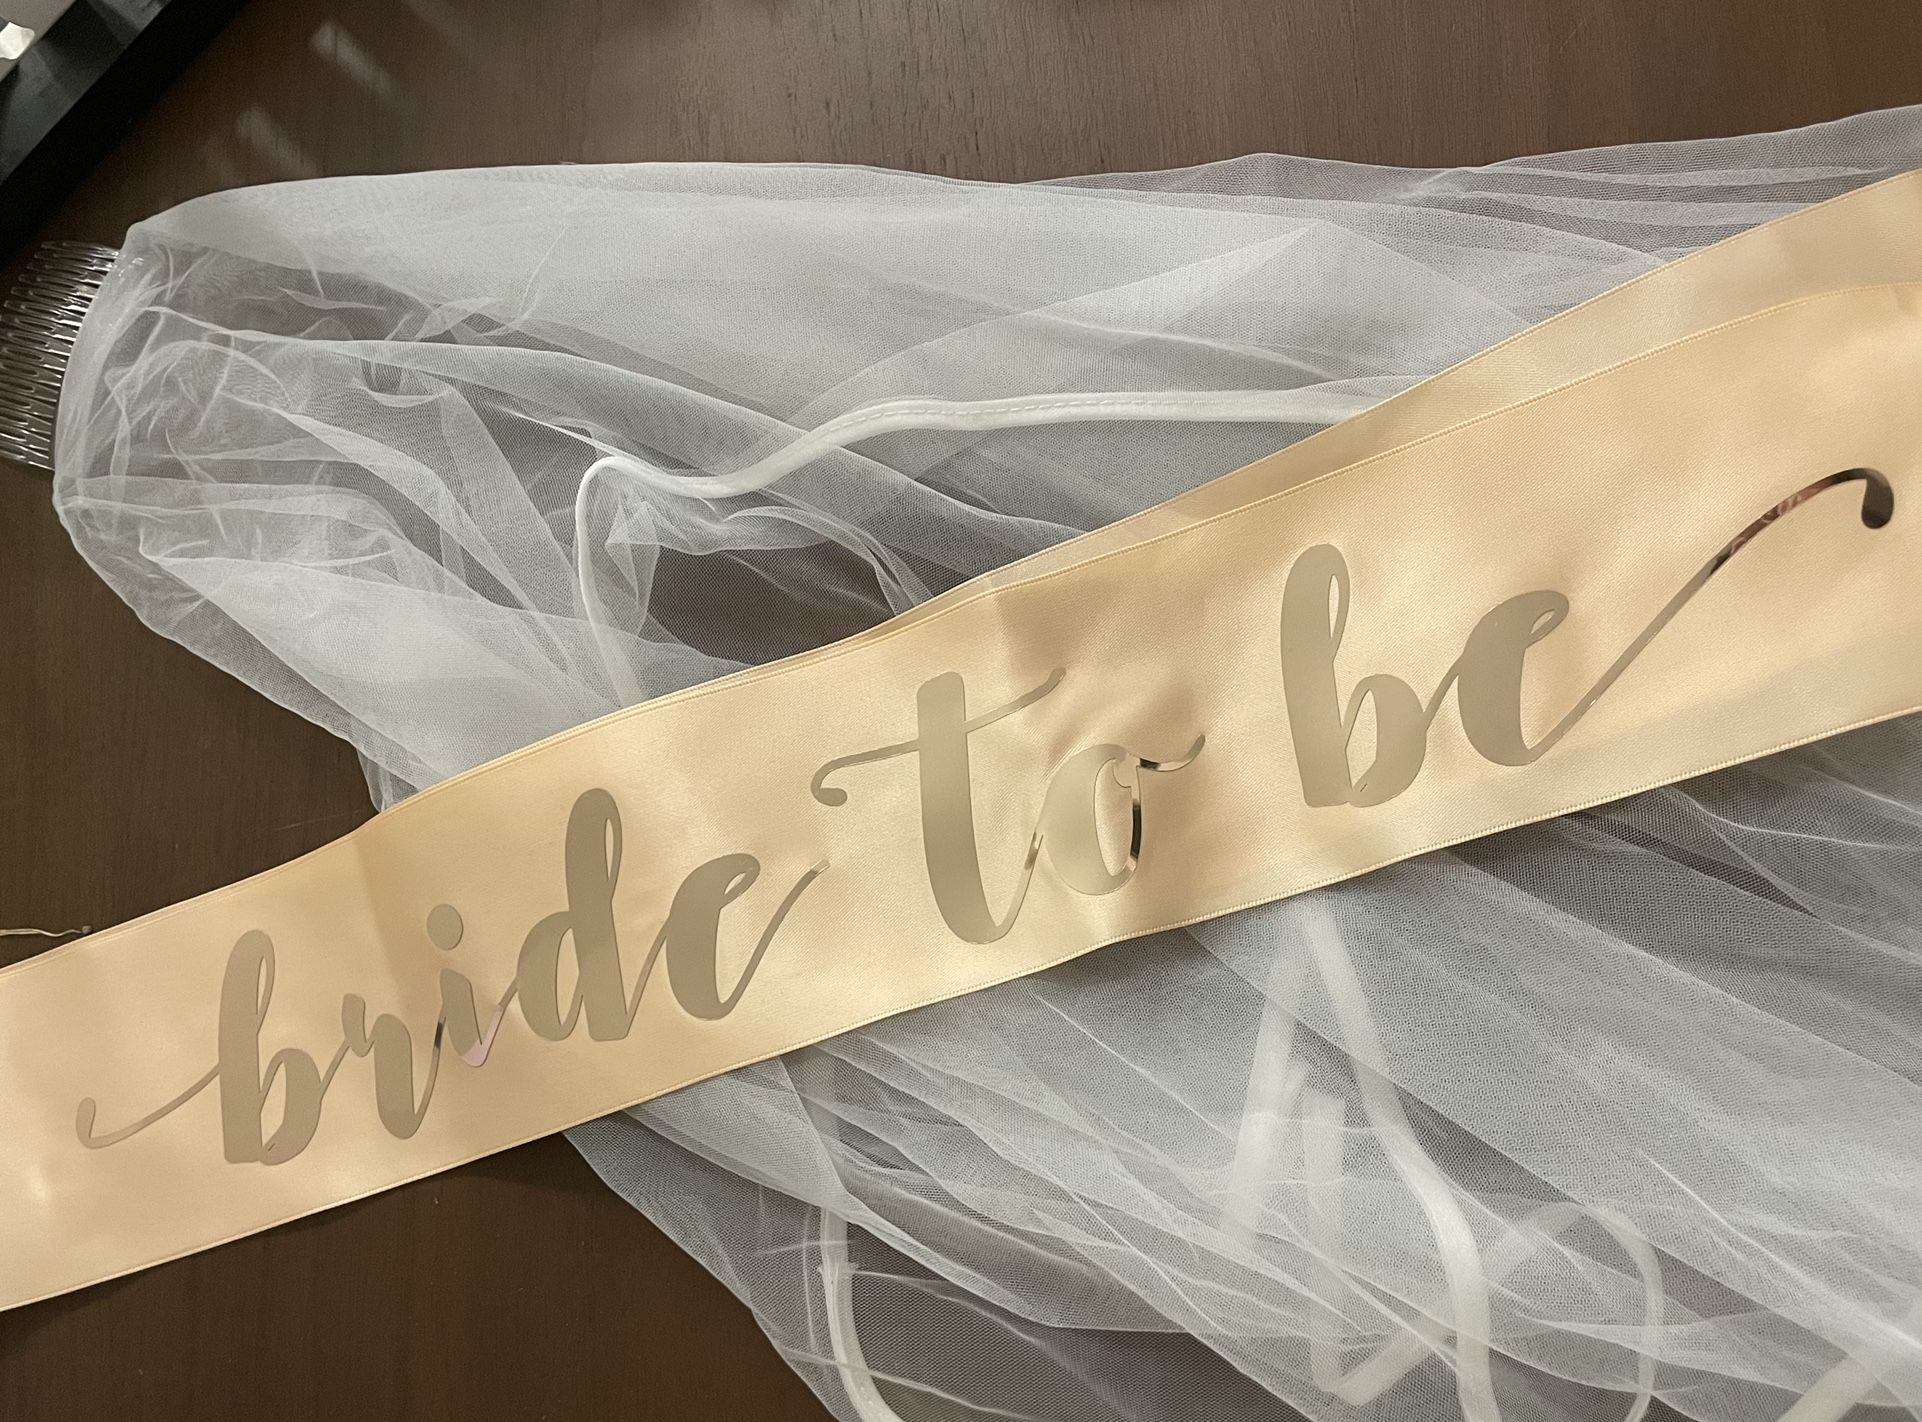  “Bride To Be” Sash And Veil 